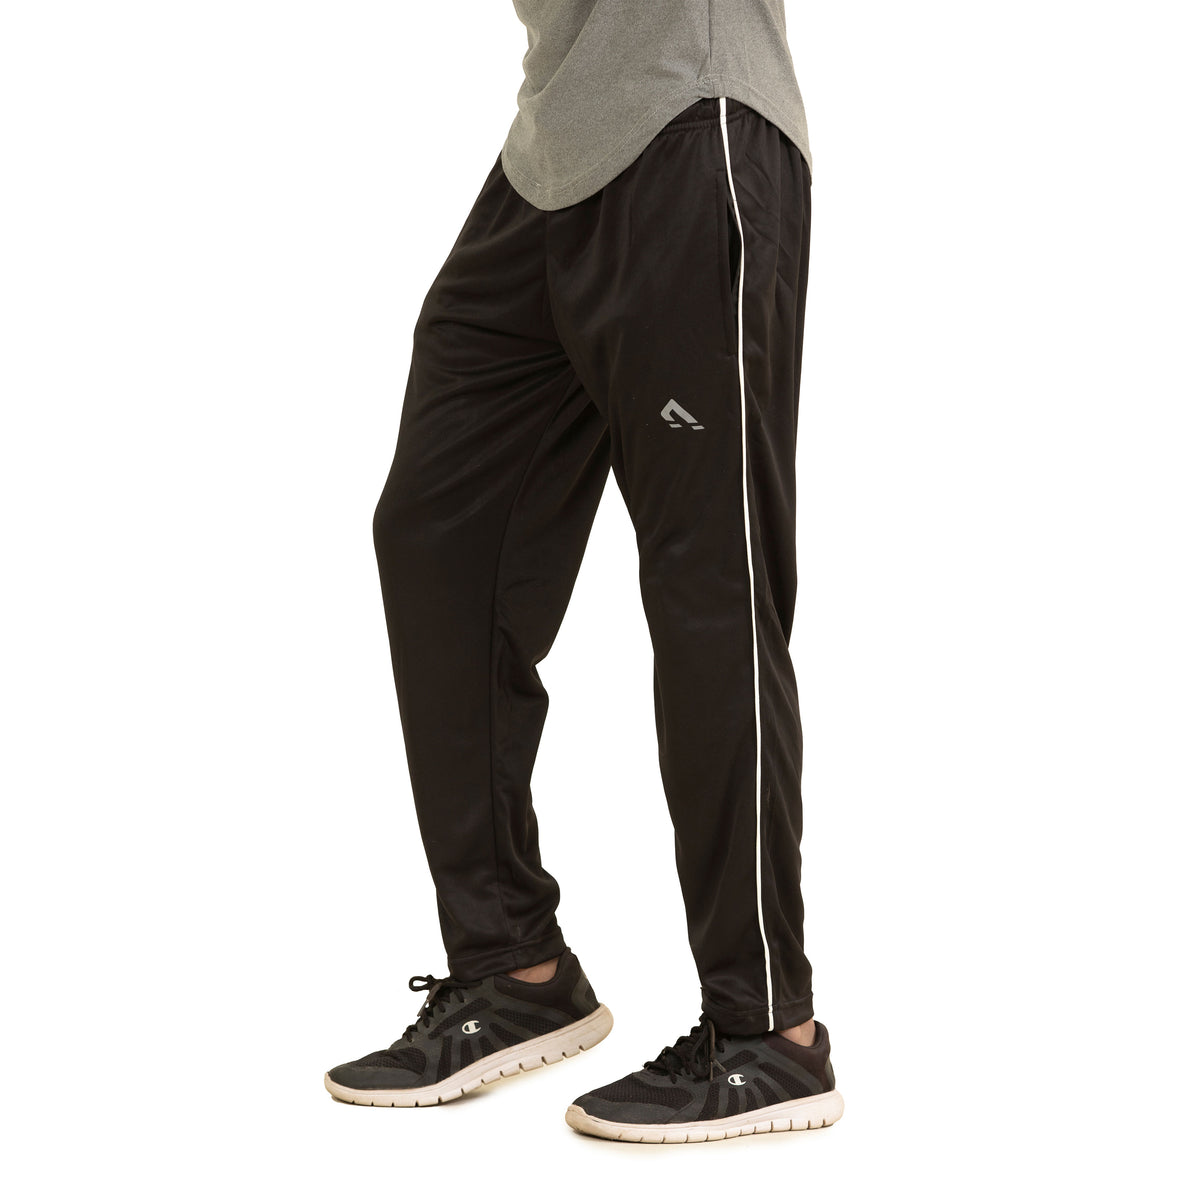 Men Sports Trousers in Pakistan - Buy Gym Trousers at Best Price – Alay